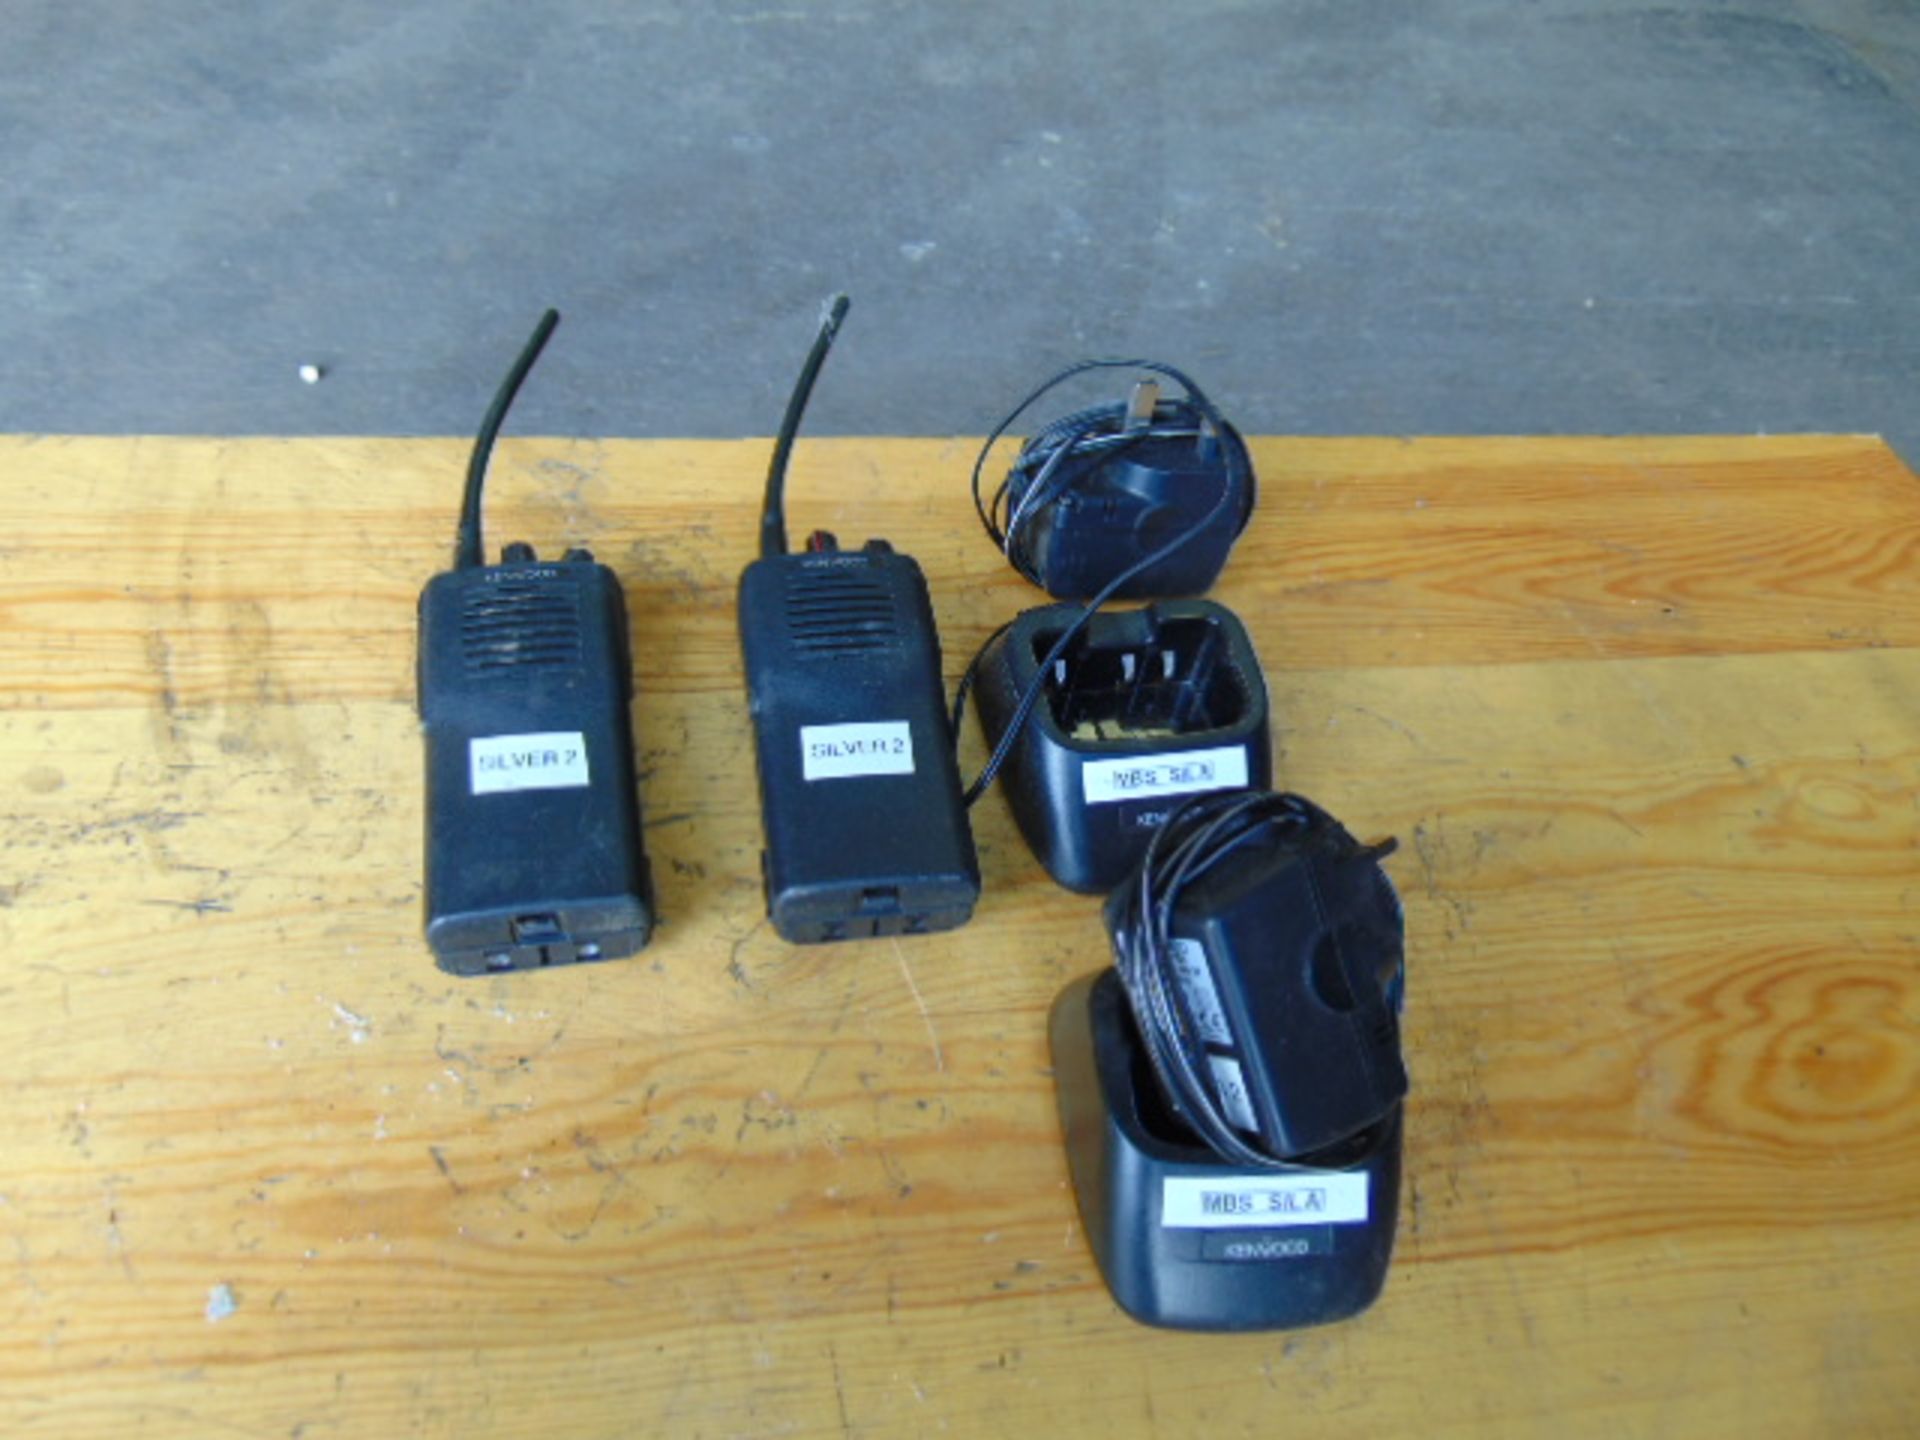 2 x Kenwood Walkie Talkies c/w Chargers and Main Adapters - Bild 4 aus 6